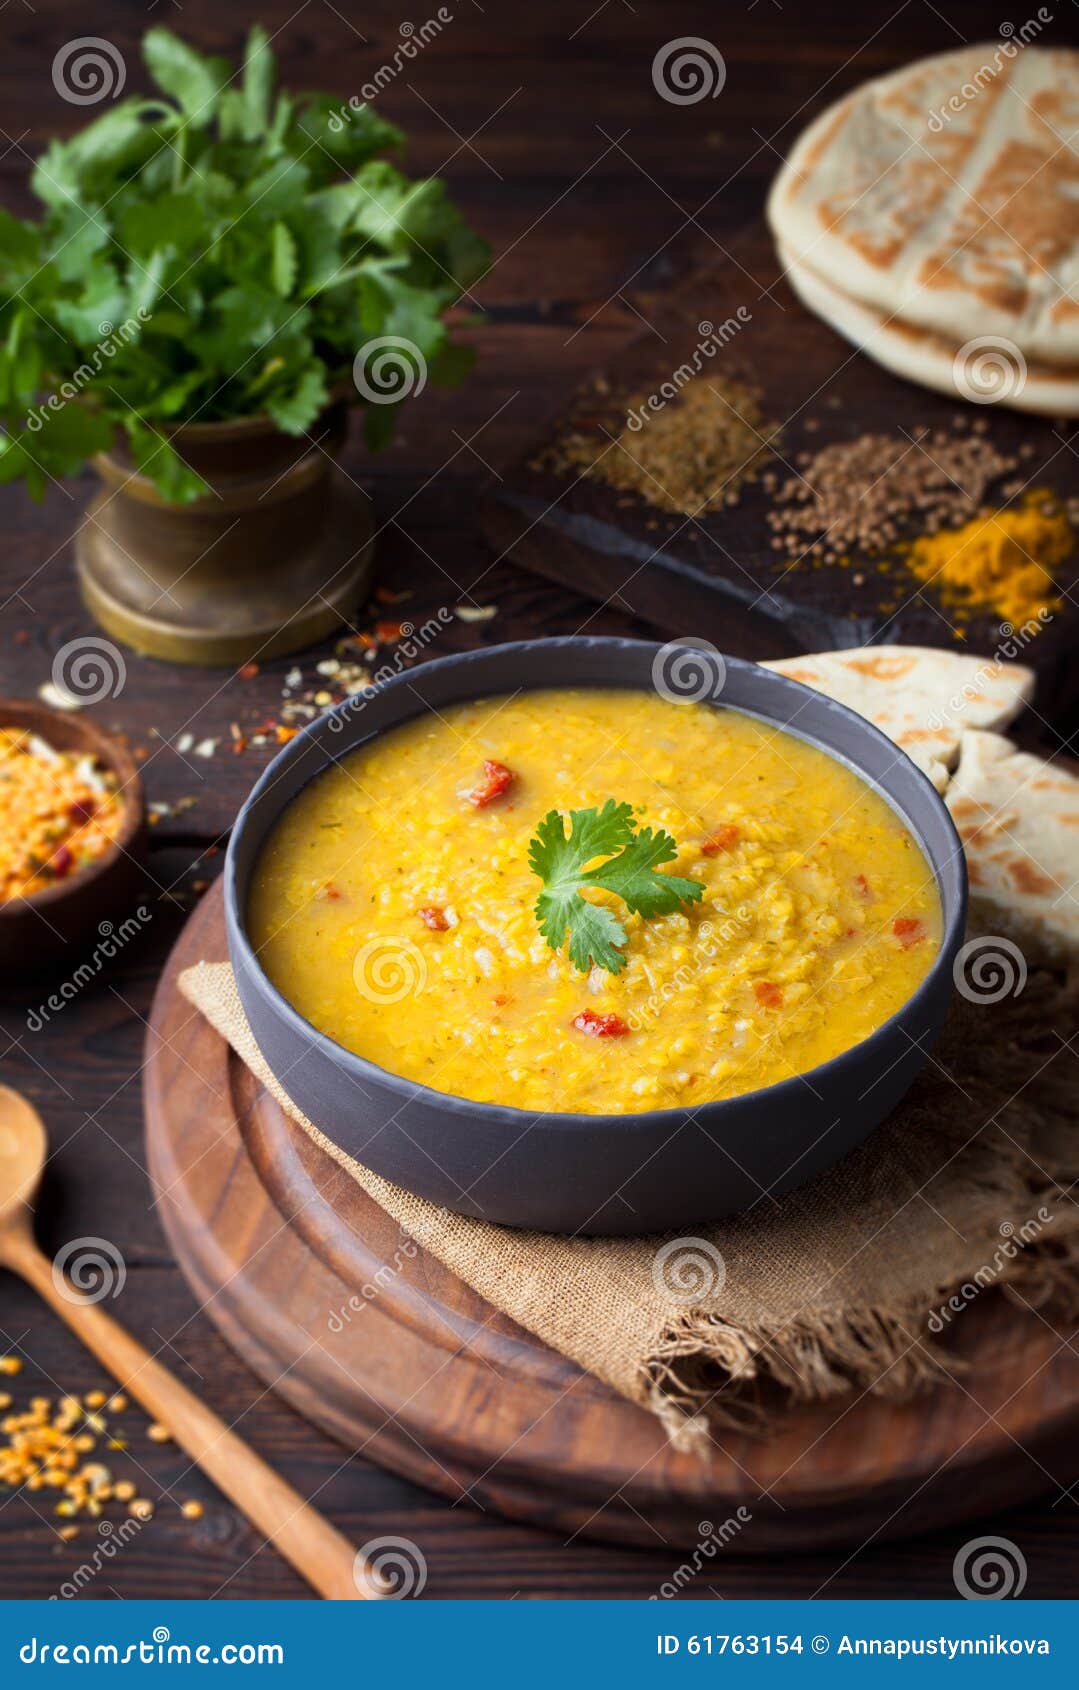 Red Lentil Indian Soup With Flat Bread. Masoor Dal. Stock Photo - Image ...